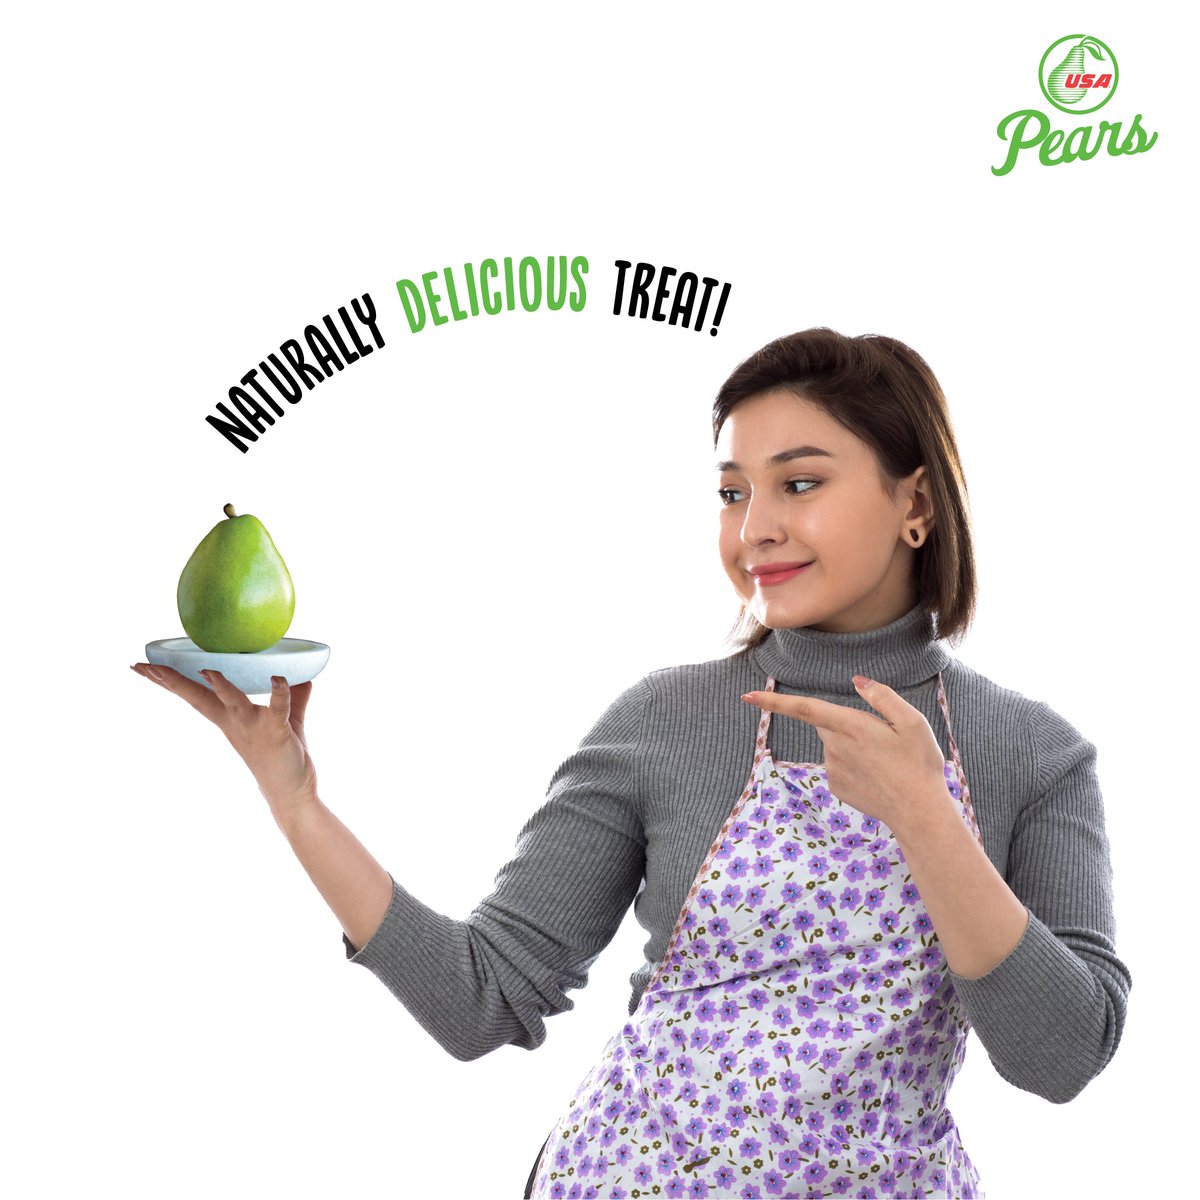 Looking for a healthy indulgence? USA Pear is the ultimate choice.

#USAPears #USAPearIndia #Pears #Fruit #Nutrition #HealthyChoices